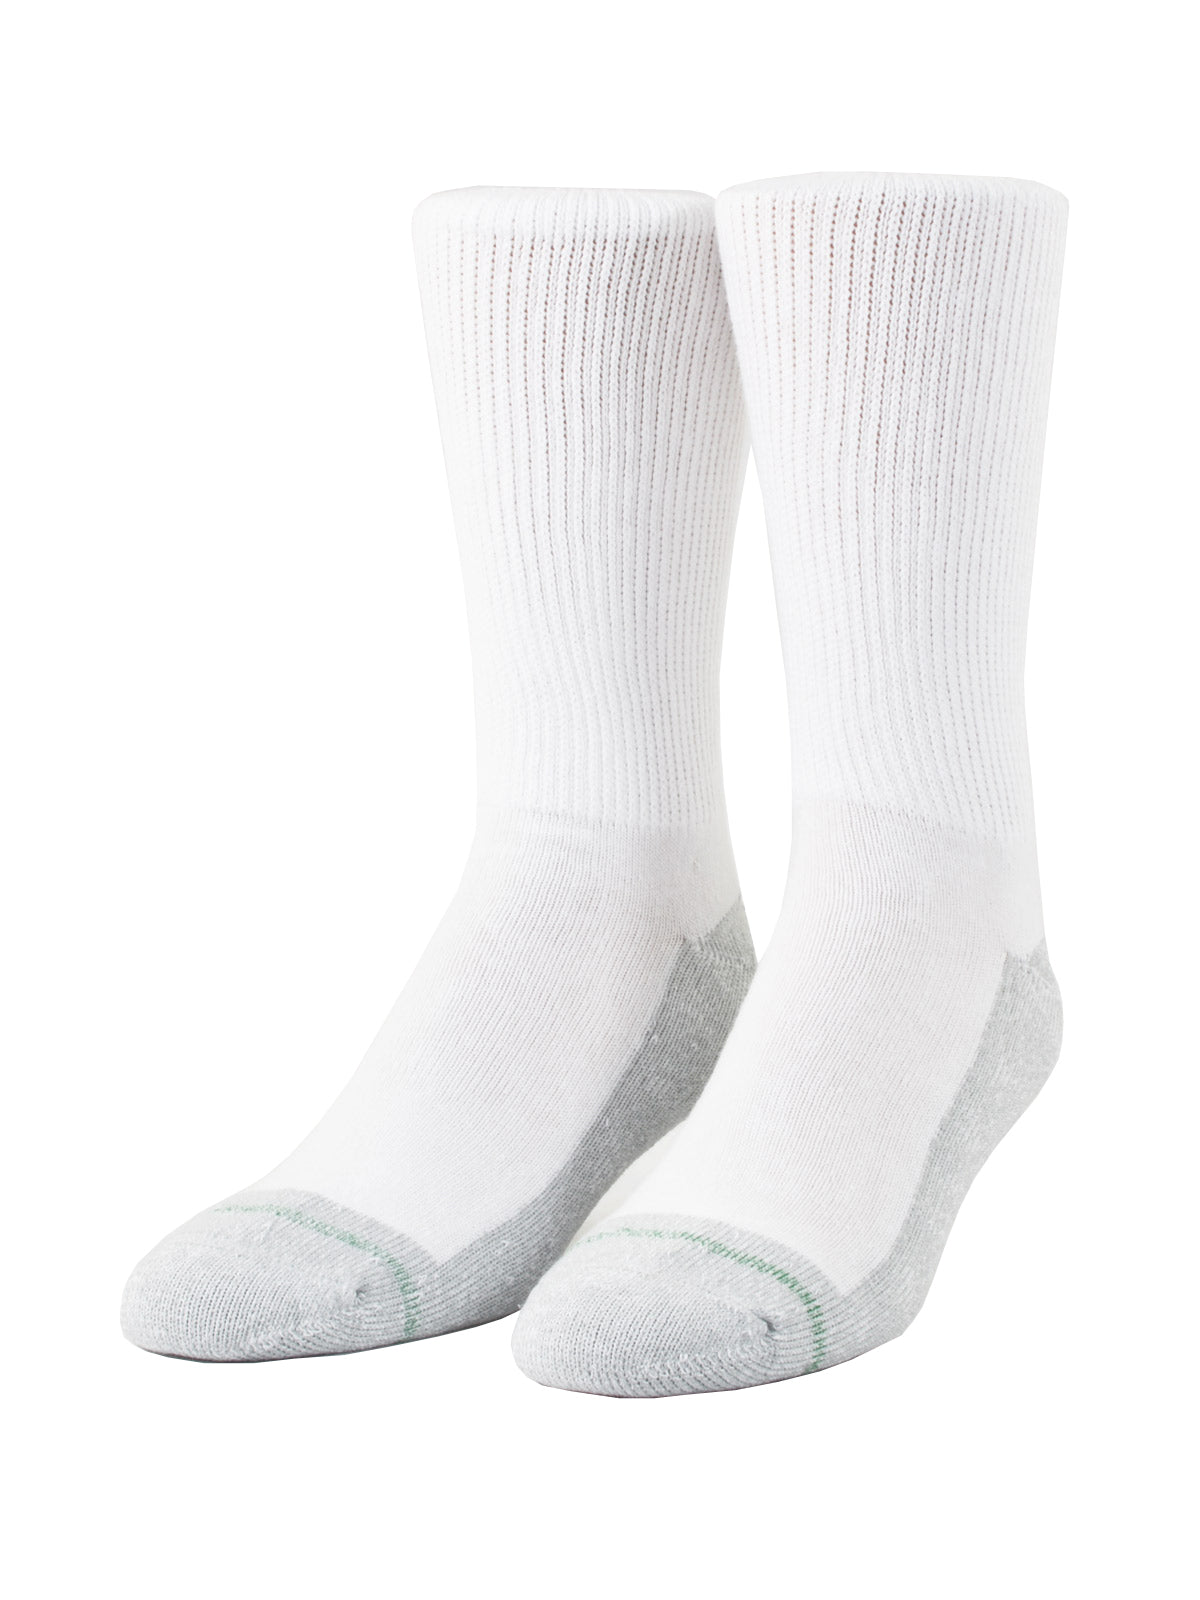 Loose Fit Stays Up Crew Athletic Socks in White - Large (Size 12 - 15) - 790